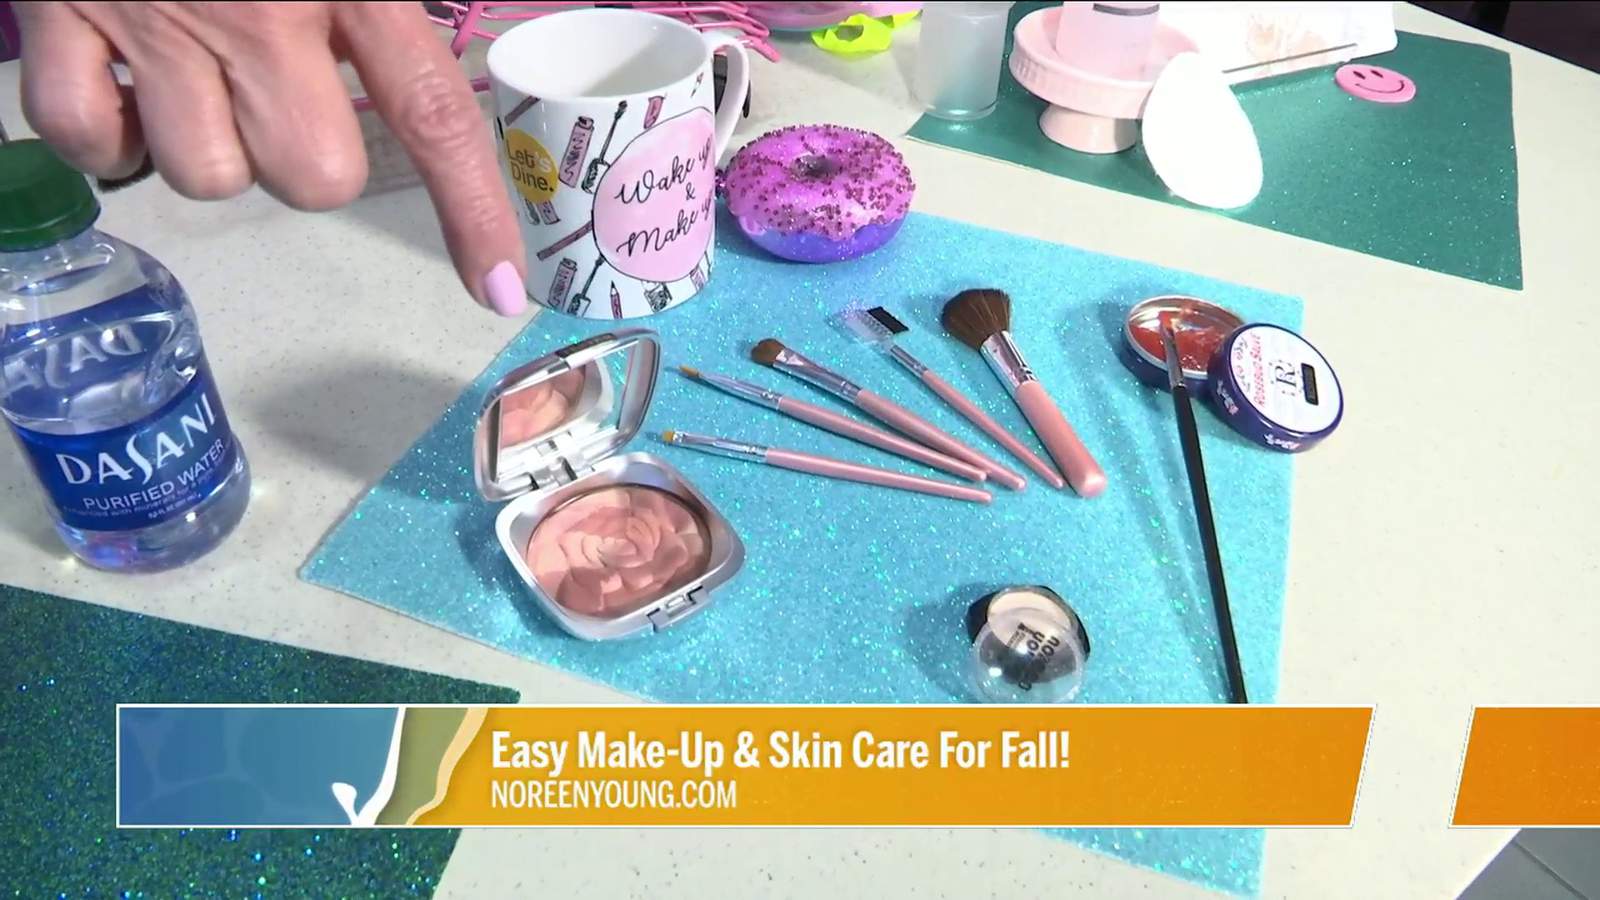 Easy Make-Up & Skin Care For Fall! | River City Live